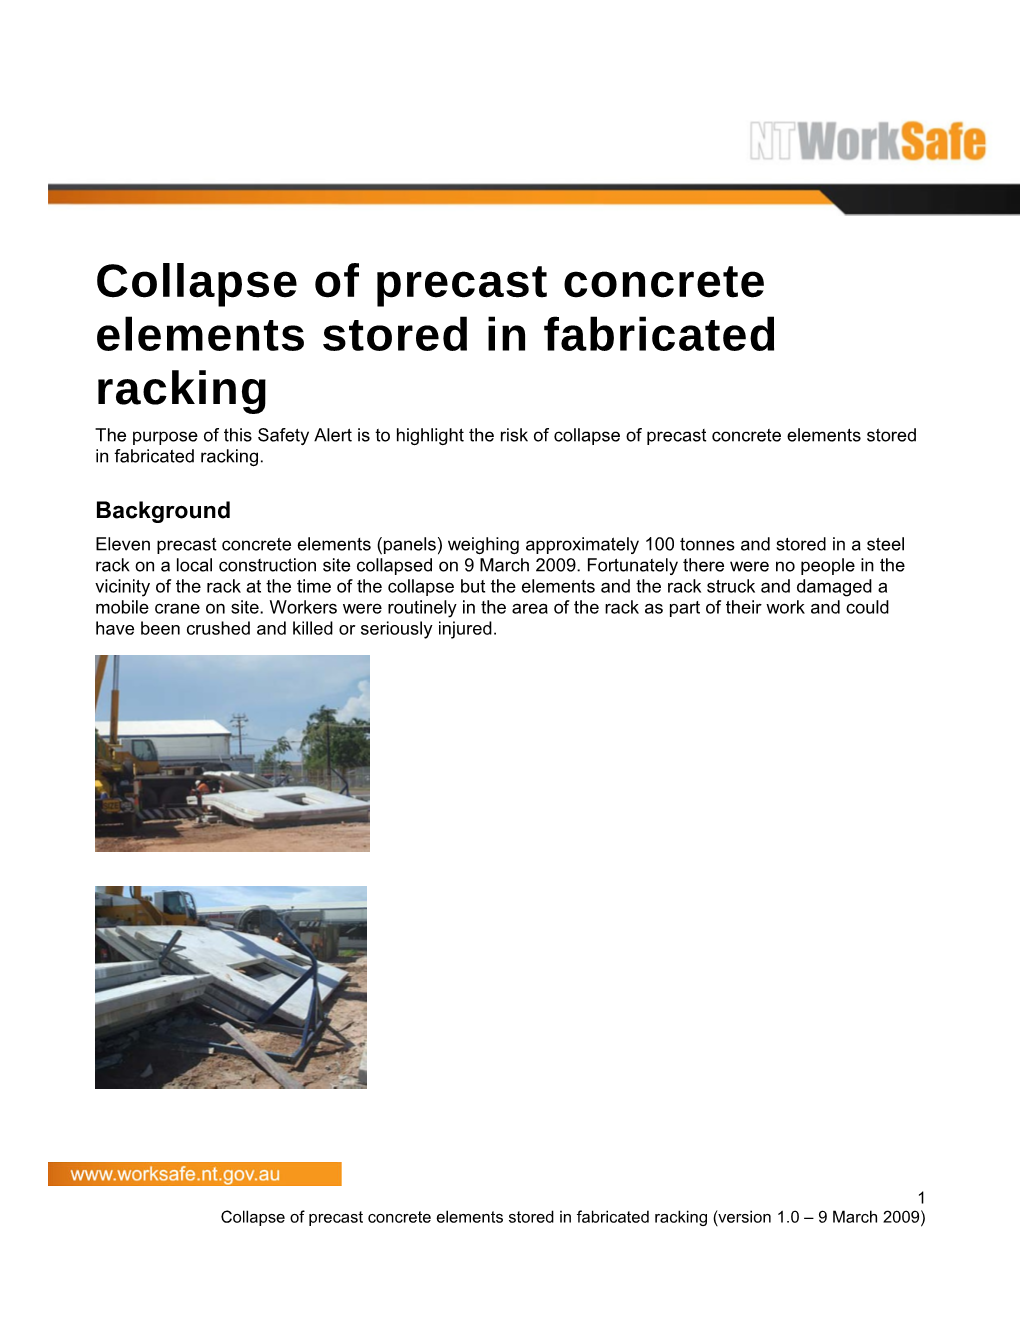 Safety Alert - Collapse of Precast Concrete Elements Stored in Fabricated Racking